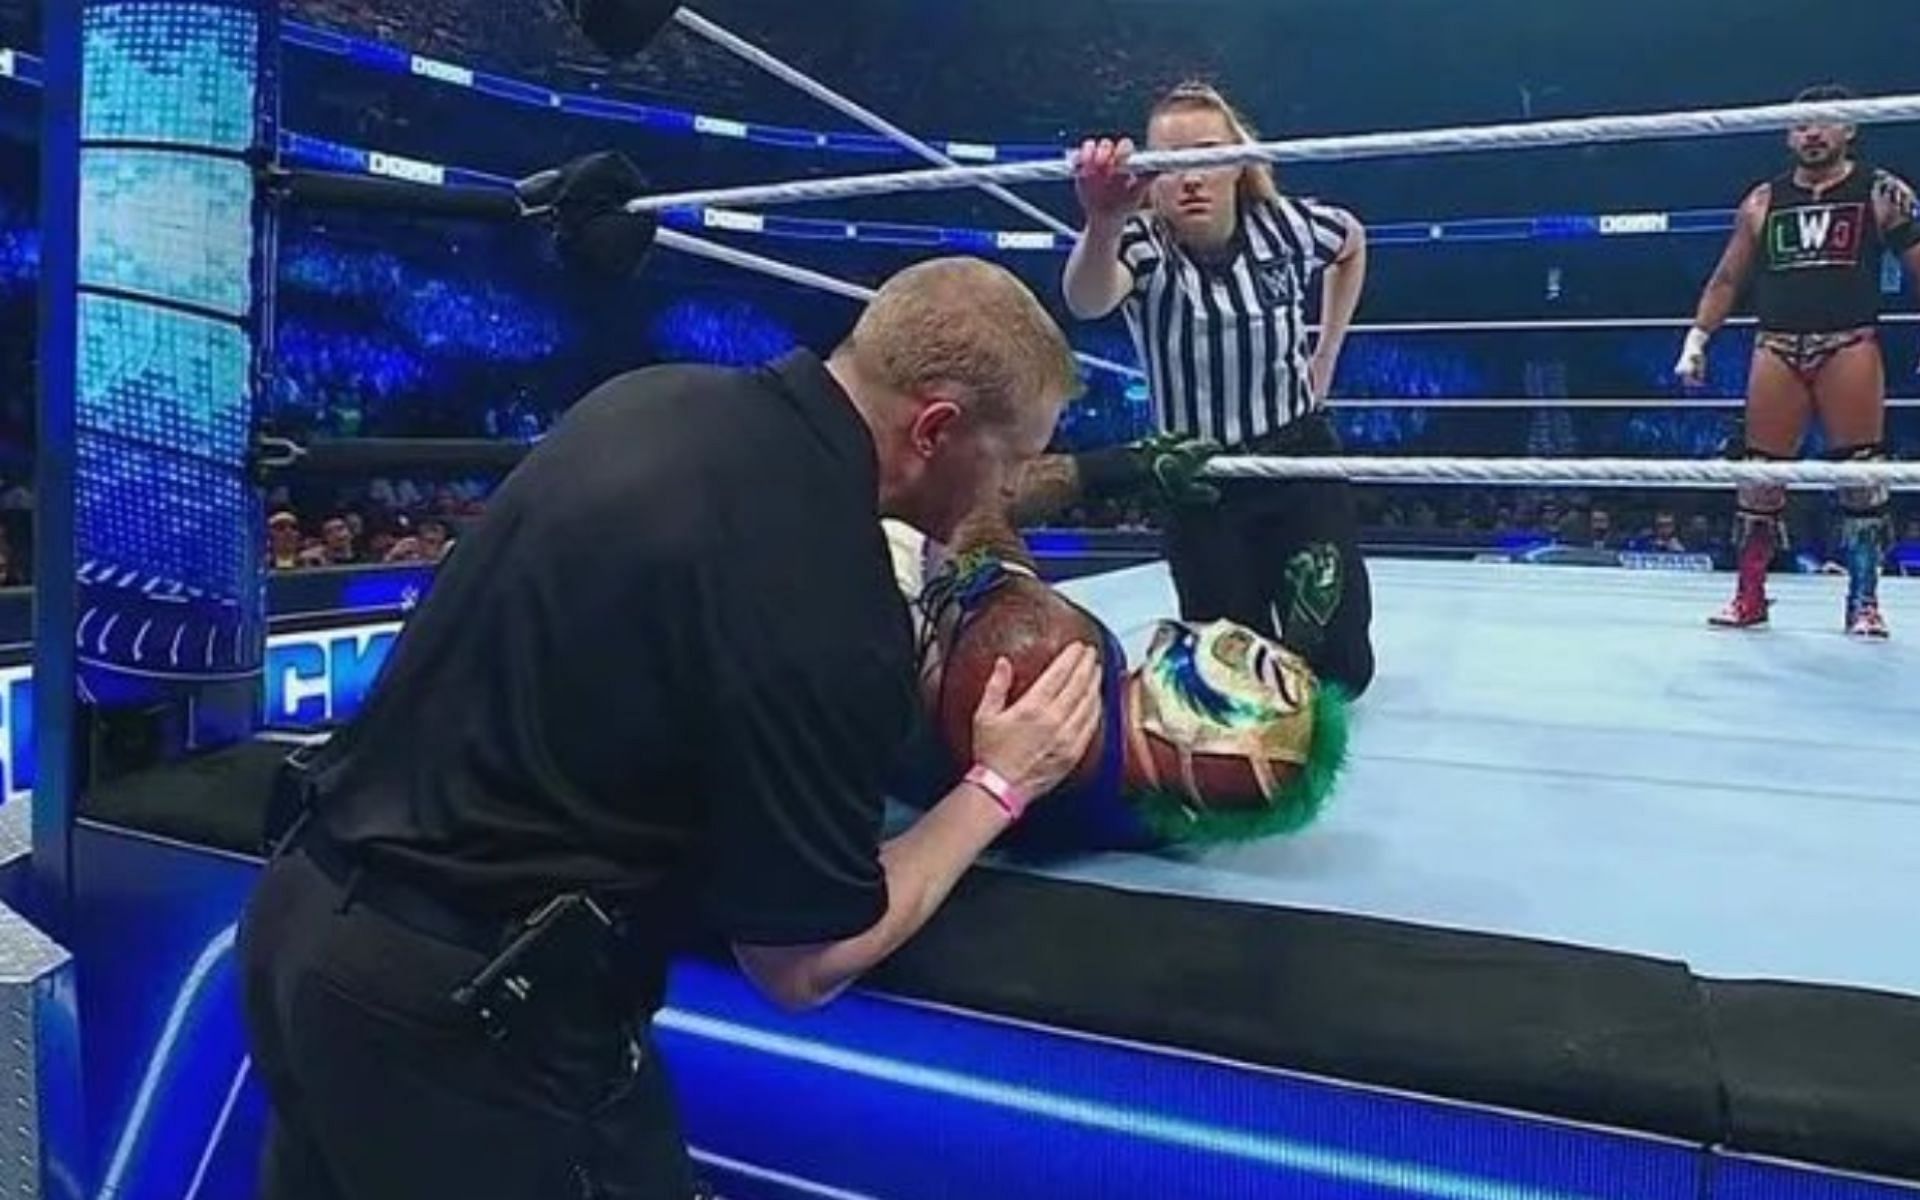 A medical official checking up on Rey Mysterio during his match